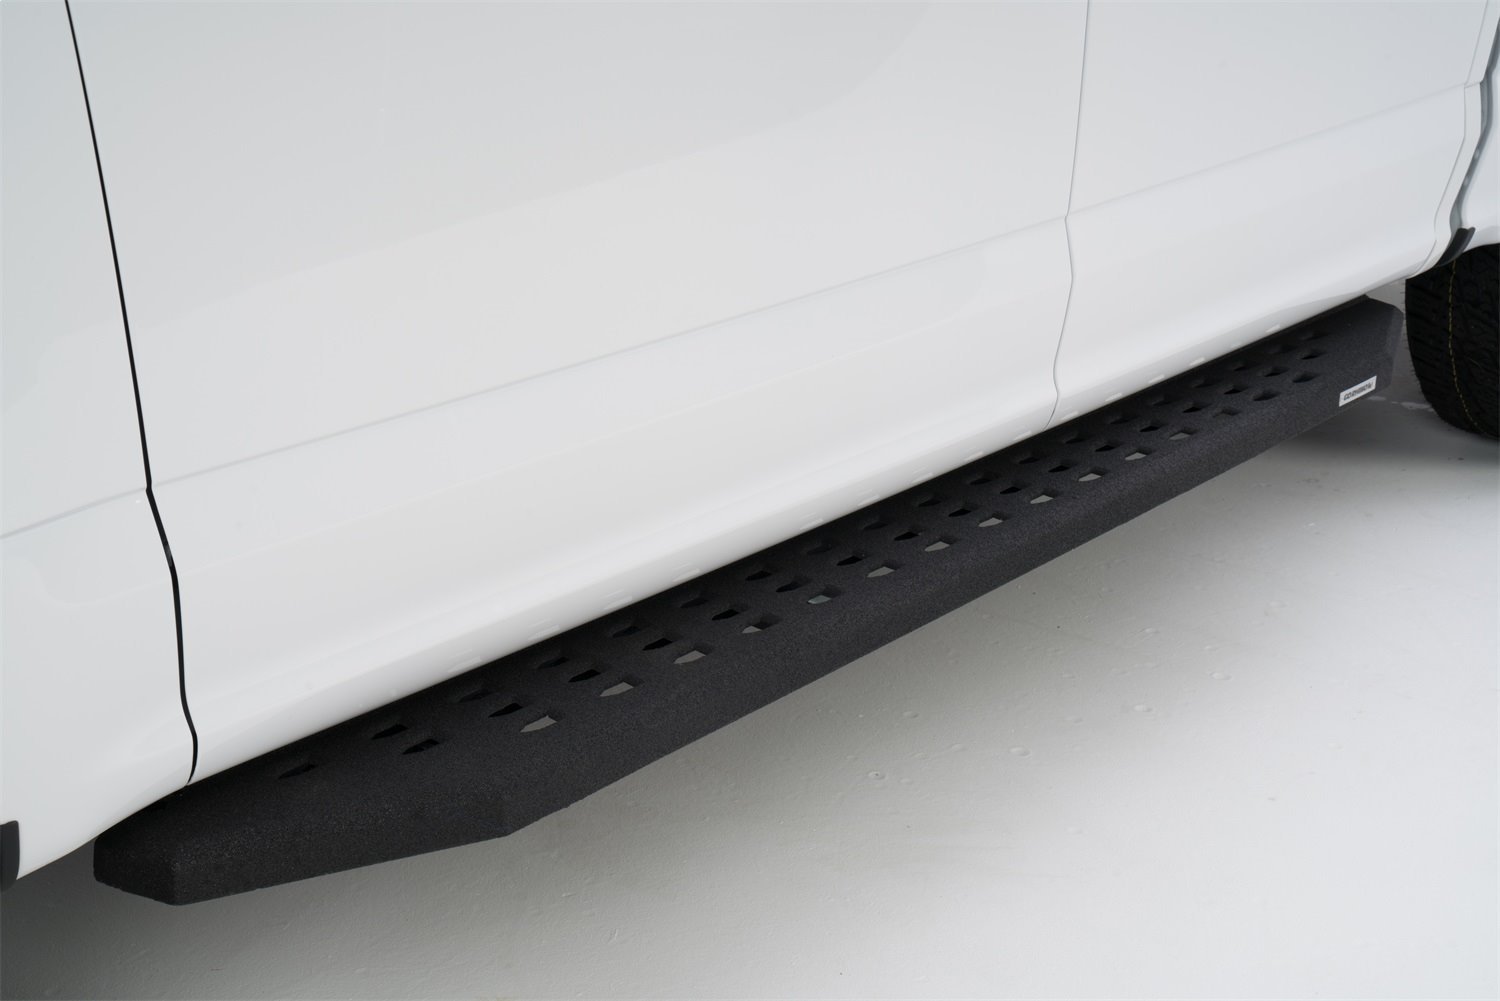 RB20 Running boards for 2005-2017 Toyota Tacoma